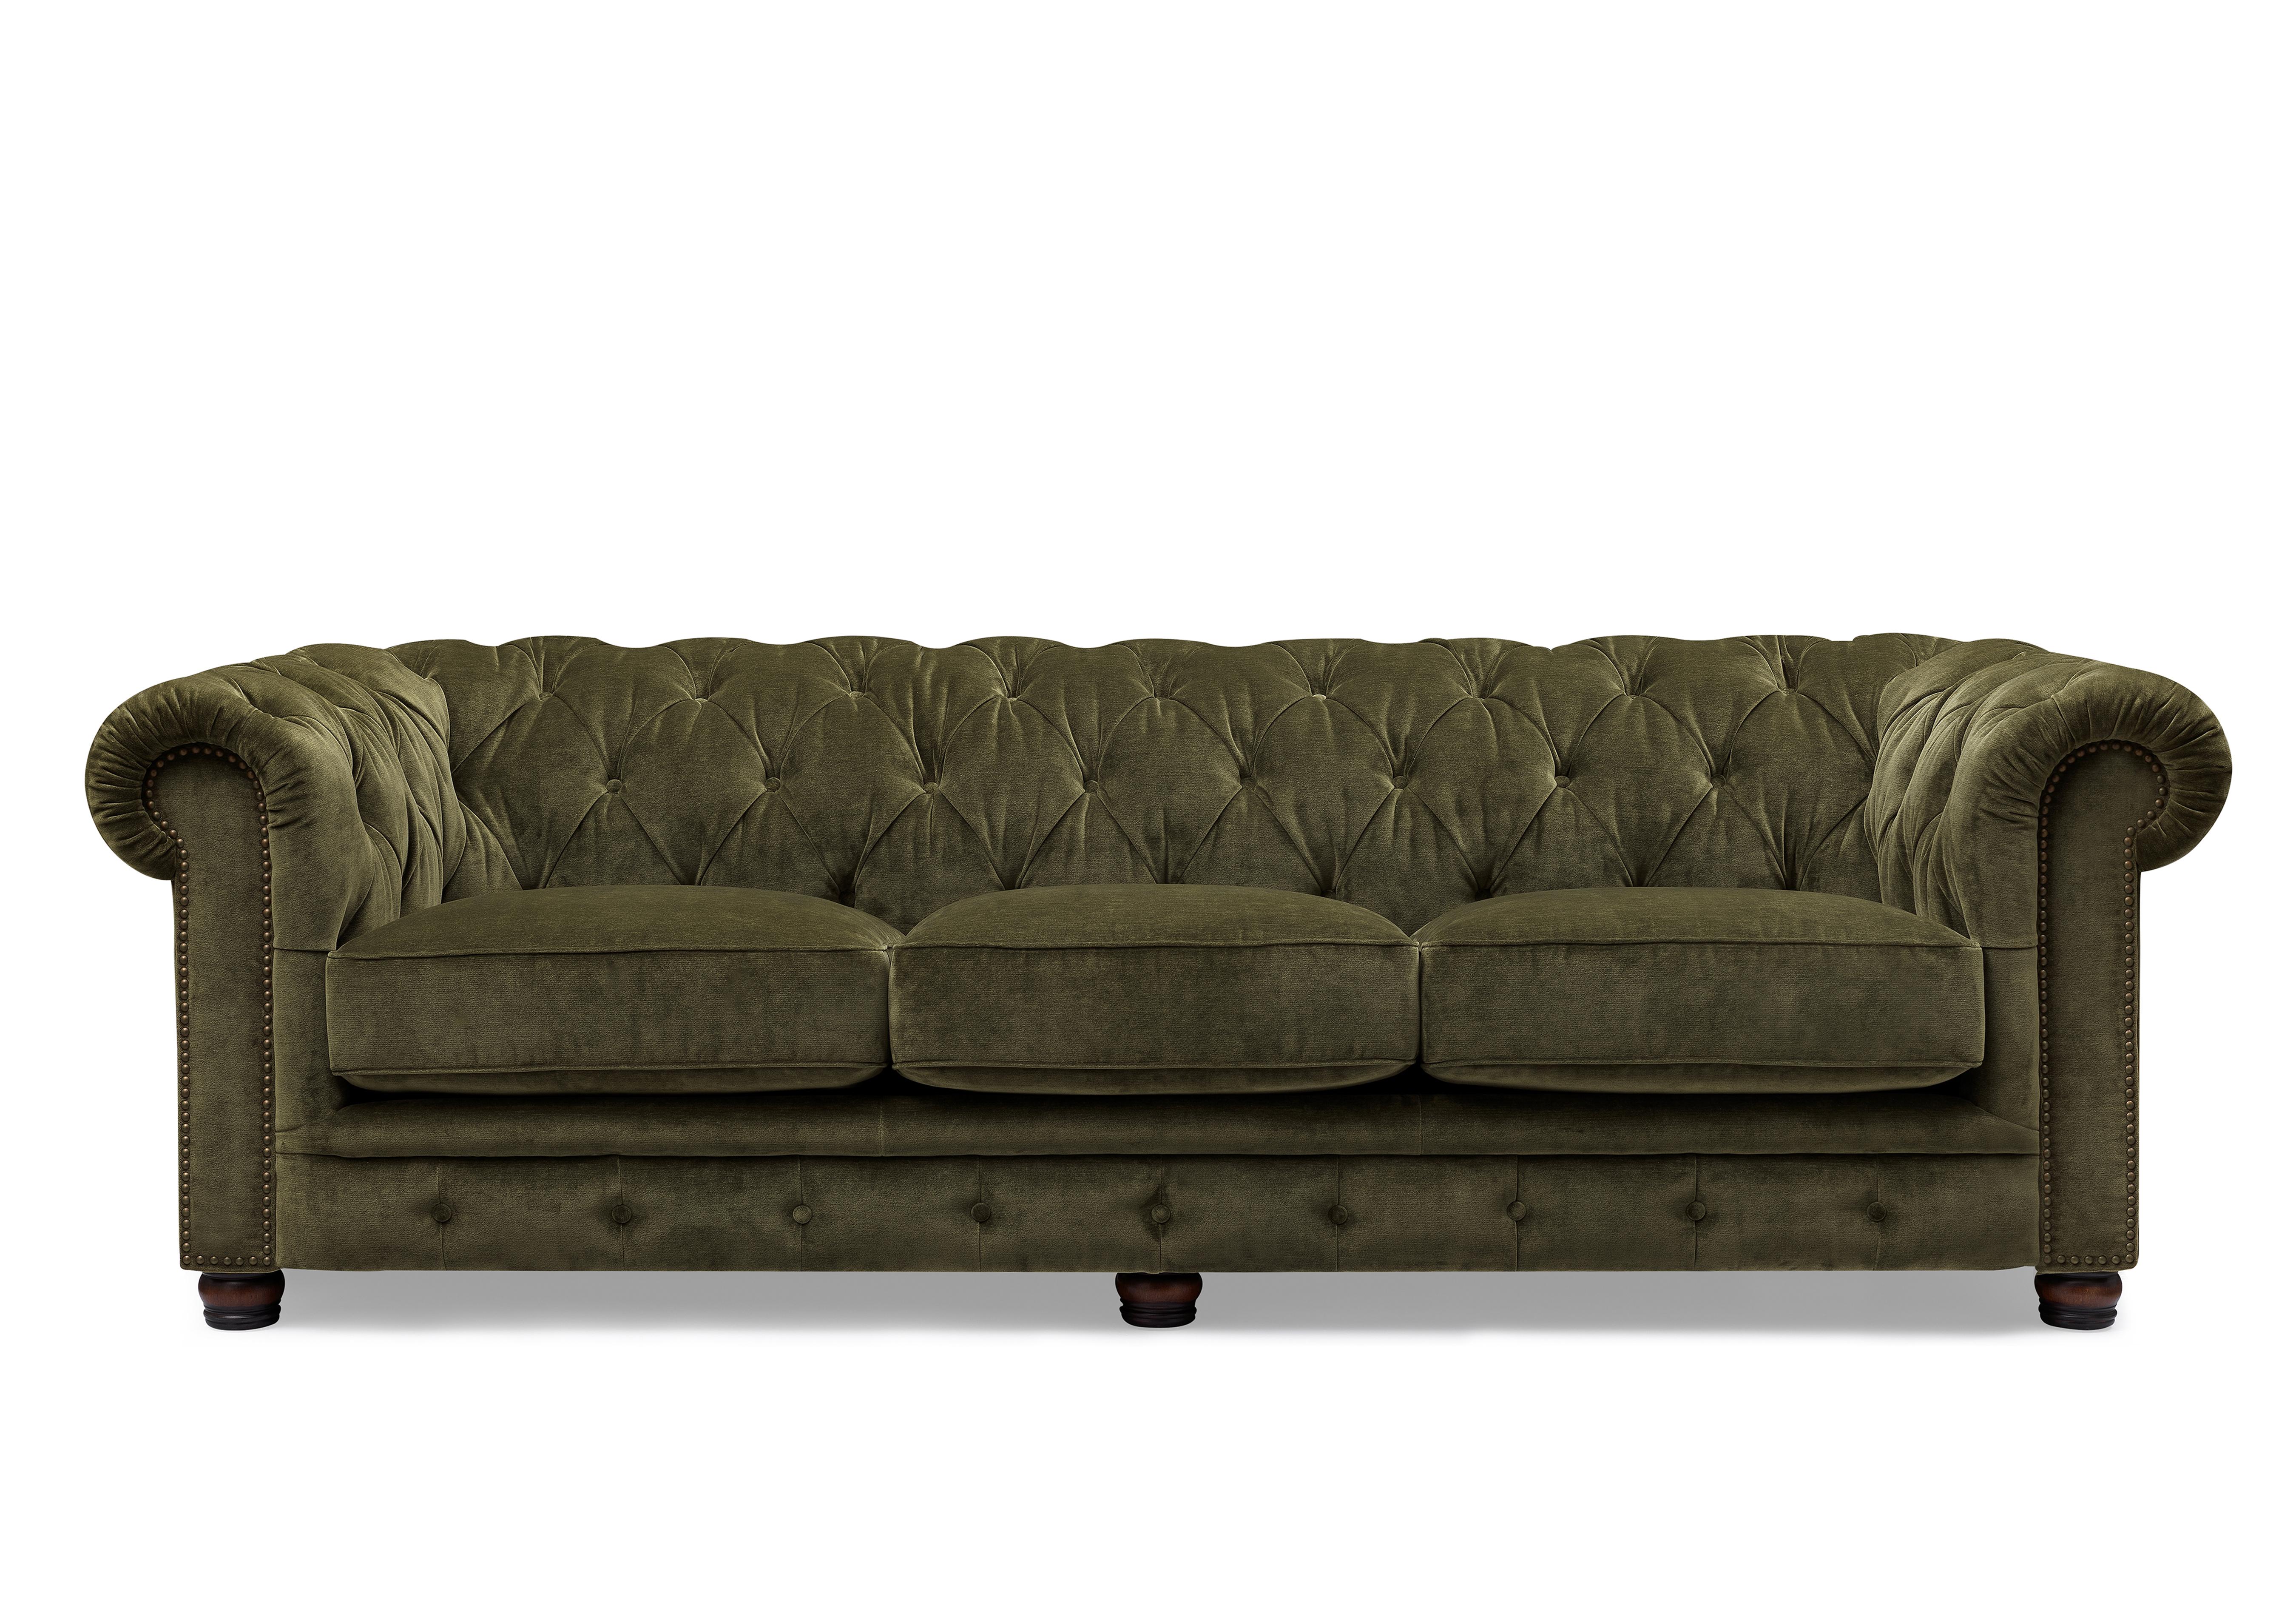 Shackleton 4 Seater Fabric Chesterfield Sofa with USB-C in X3y1-W018 Pine on Furniture Village